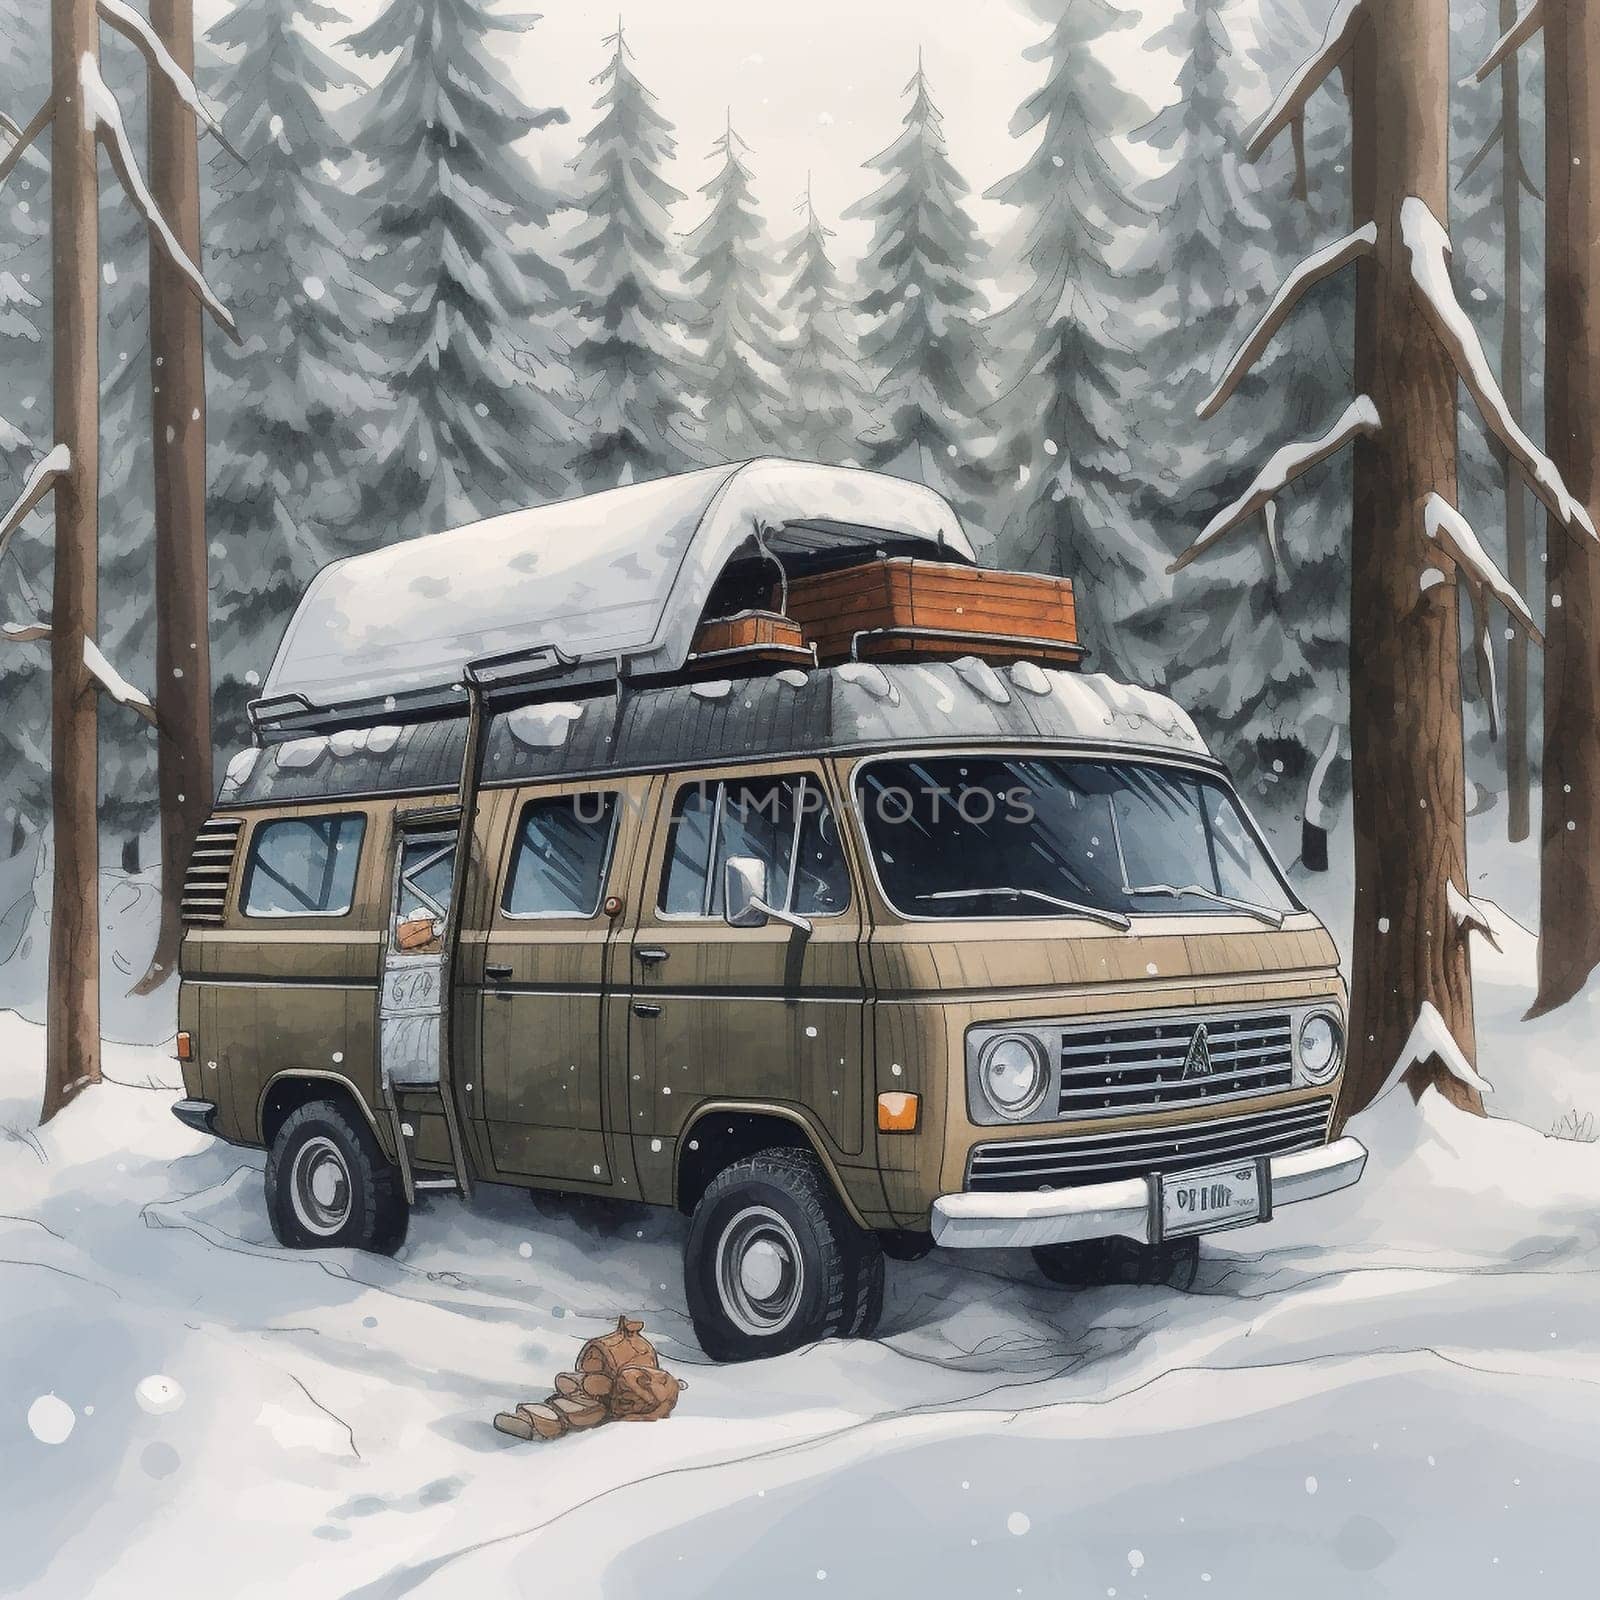 Rugged Camper Van in a Snow-Covered Forest by Sahin